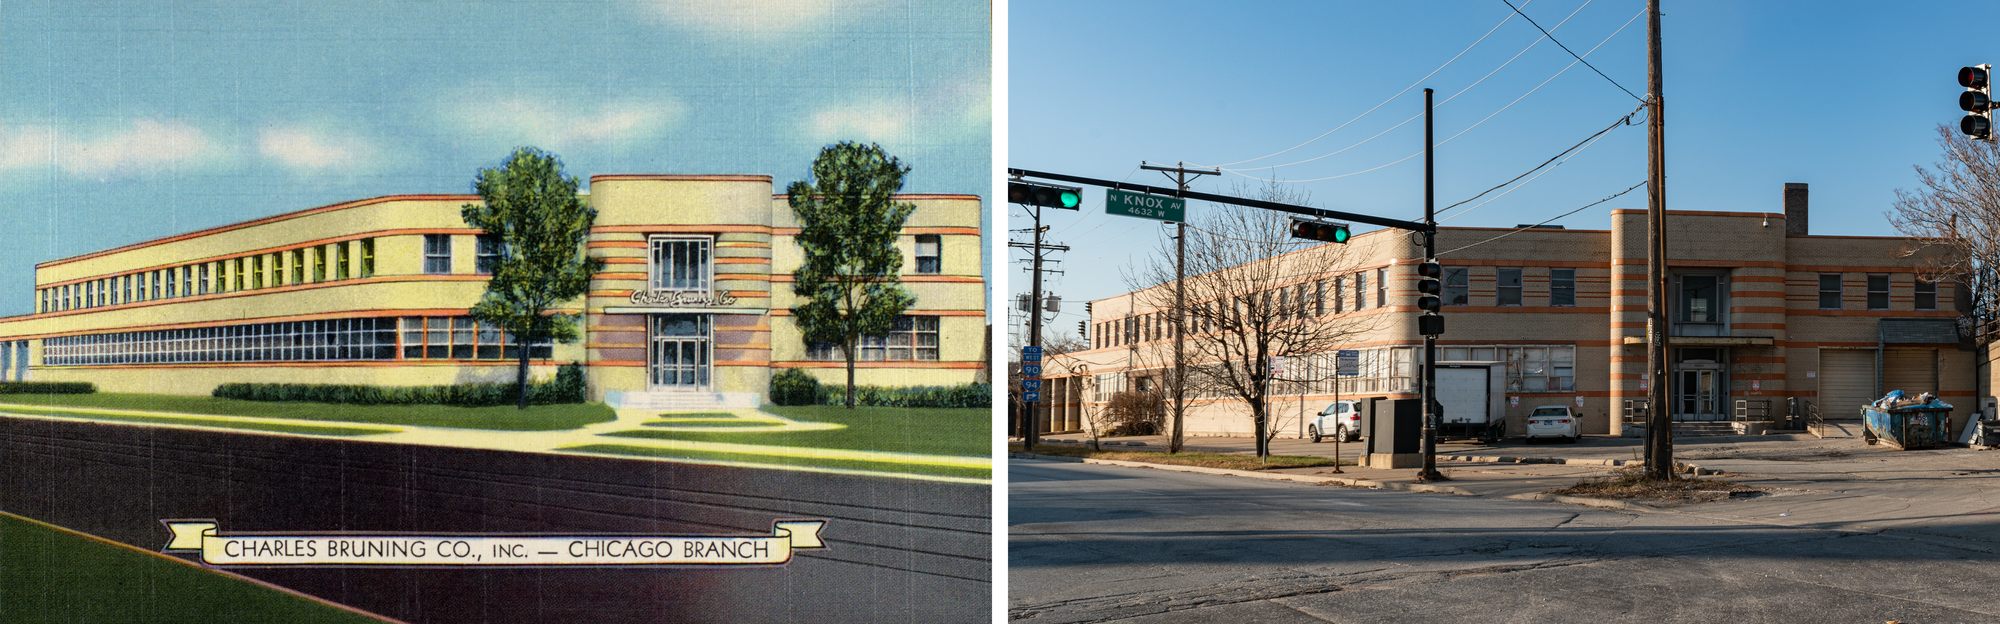 On the left, a 1943 postcard of the Charles Bruning Co. factory. Yellow brick, orange terracotta in long, horizontal bands. Two young trees in front. Streetcar tracks visible on the street. On the right, a 2020 photo of the building looking much the same. 